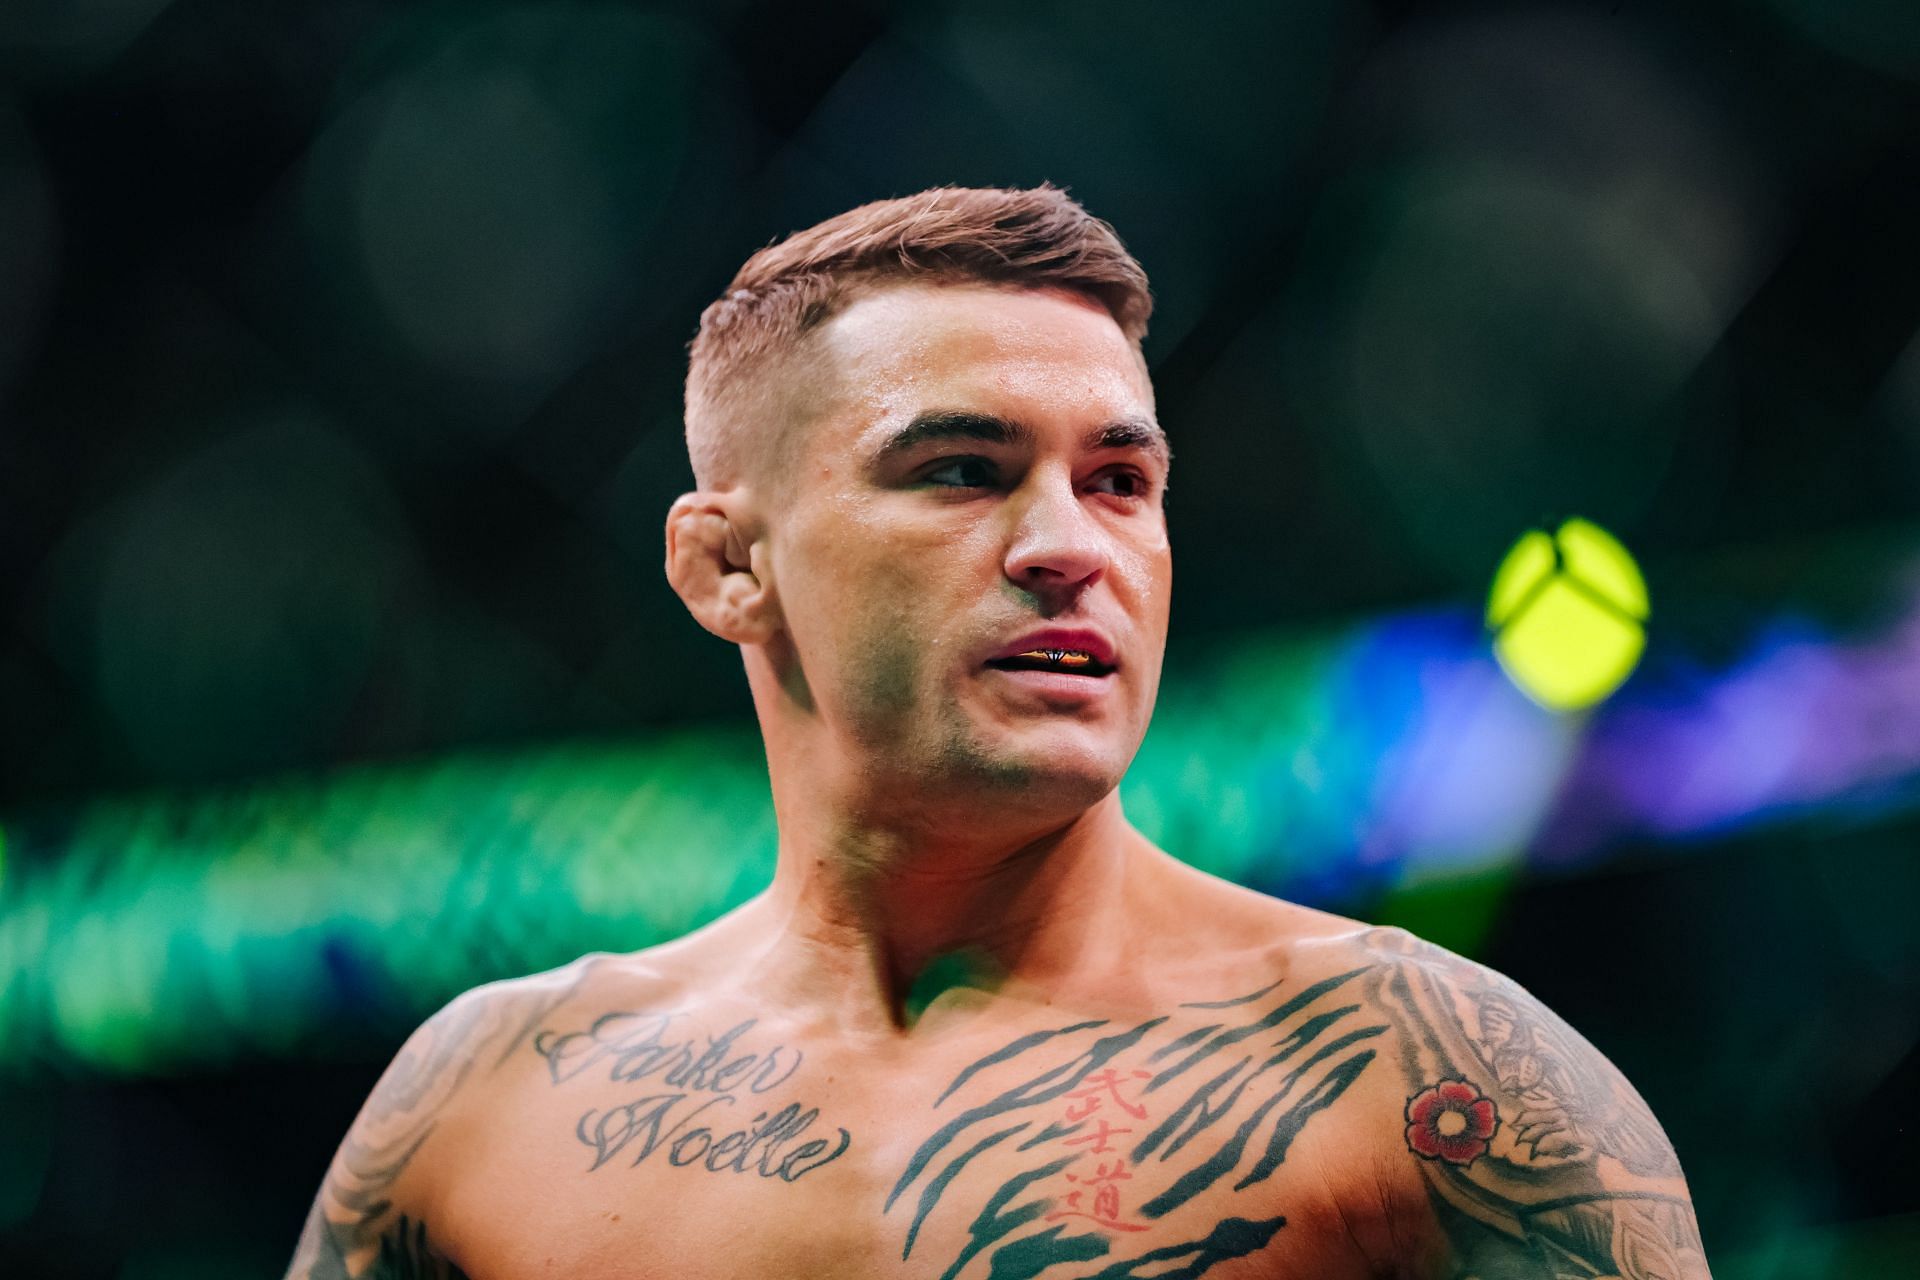 Following his loss to Charles Oliveira, who is next for UFC superstar Dustin Poirier?